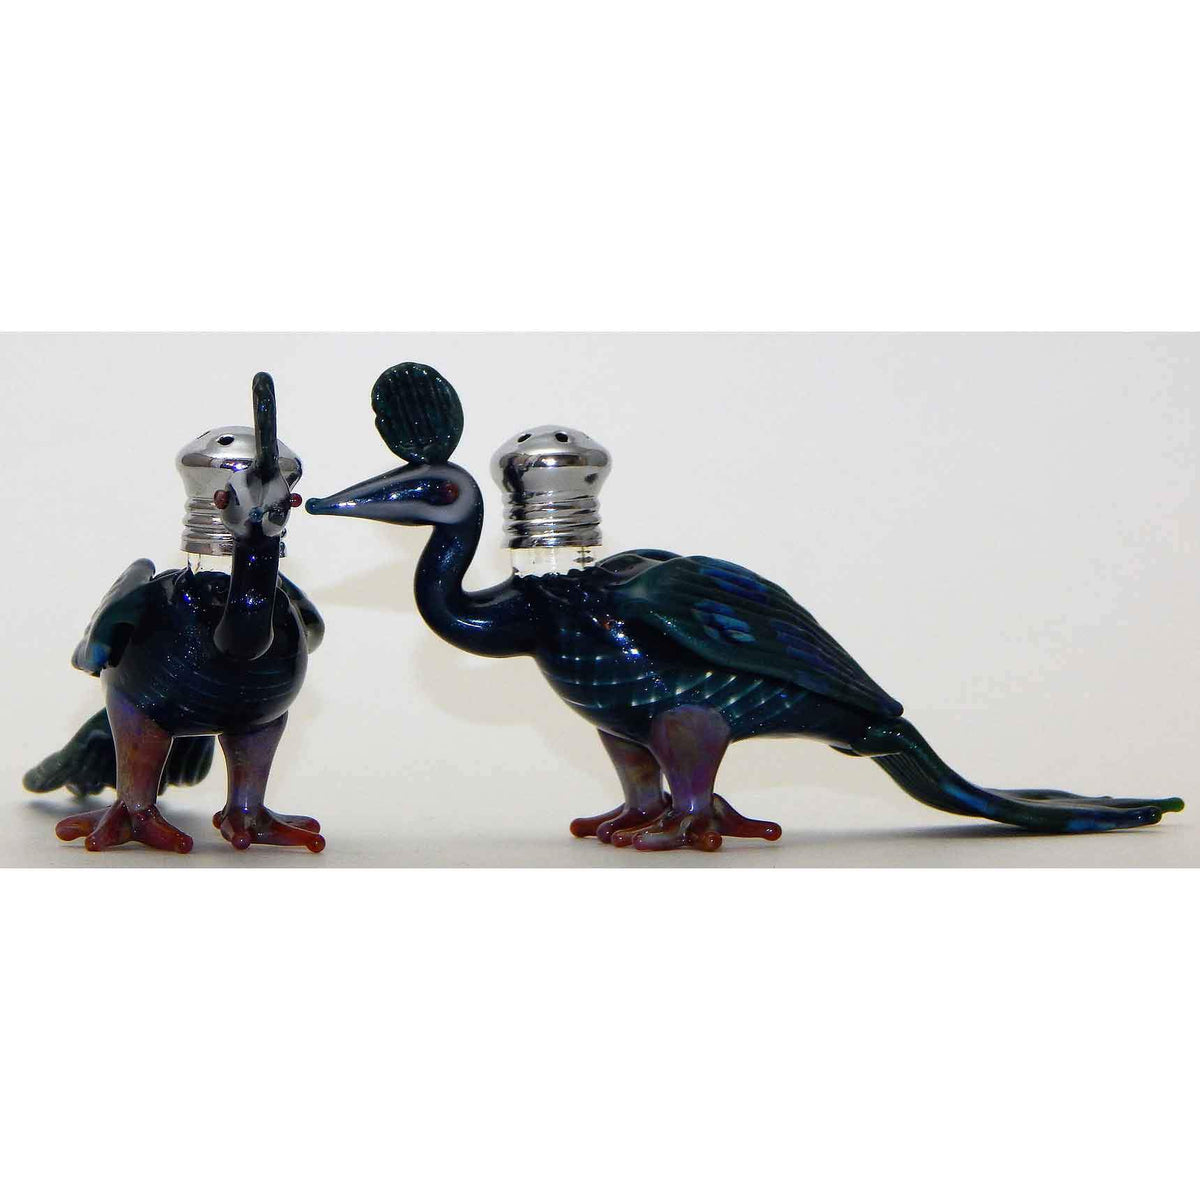 Donkey and Elephant Mix and Match 275 Blown Glass Salt and Pepper Shaker,  Four Sisters Art Glass – Sweetheart Gallery: Contemporary Craft Gallery,  Fine American Craft, Art, Design, Handmade Home & Personal Accessories